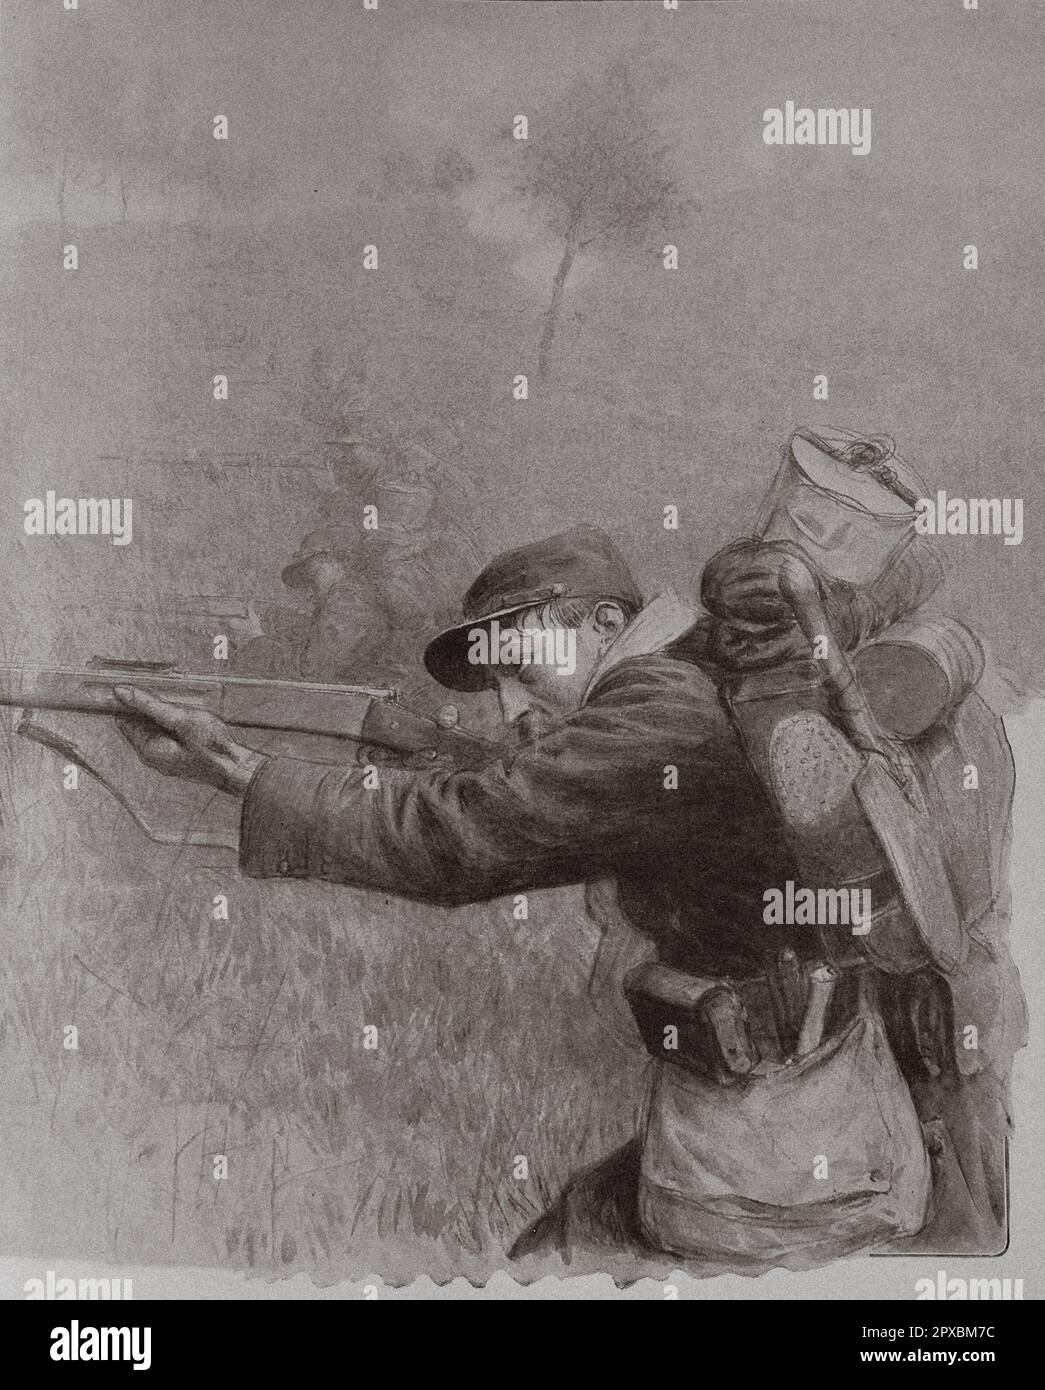 World War I. France at war.  Jump, run, shoot: a unit of French soldiers in battle. 1914 Stock Photo